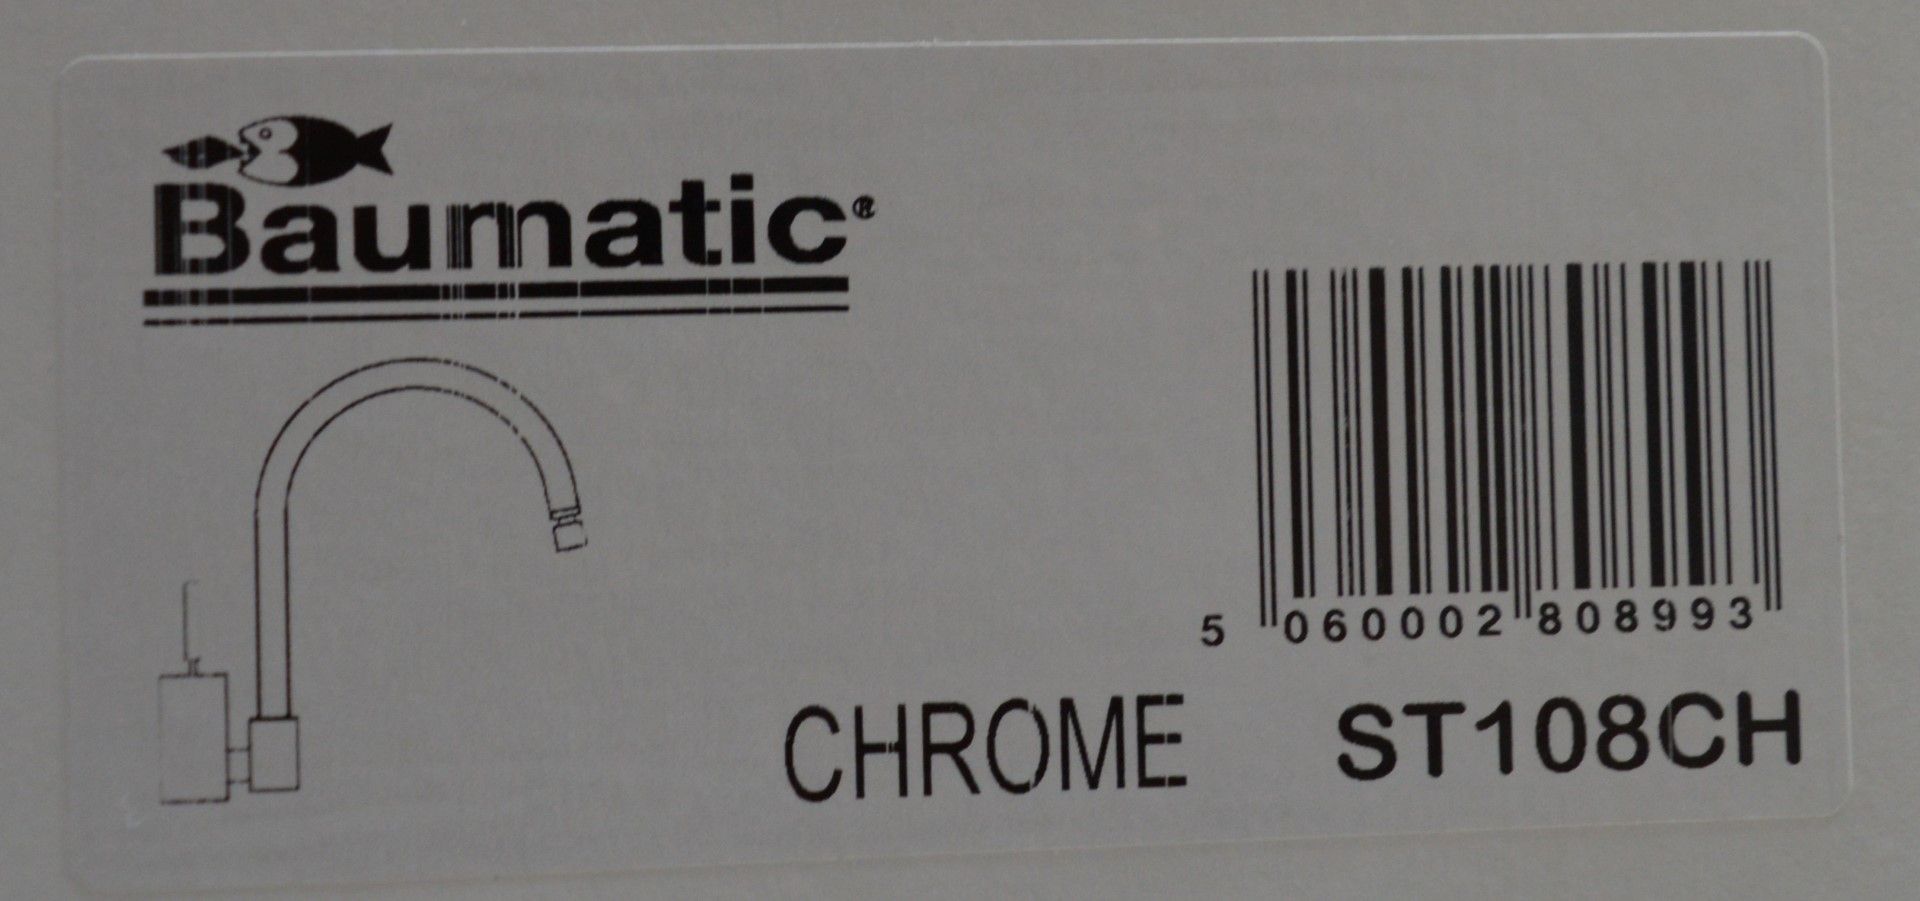 1 x Baumatic ST108CH Avalon Mixer Tap in Chrome – NEW & BOXED – CL053 – Location: Altrincham - Image 6 of 6